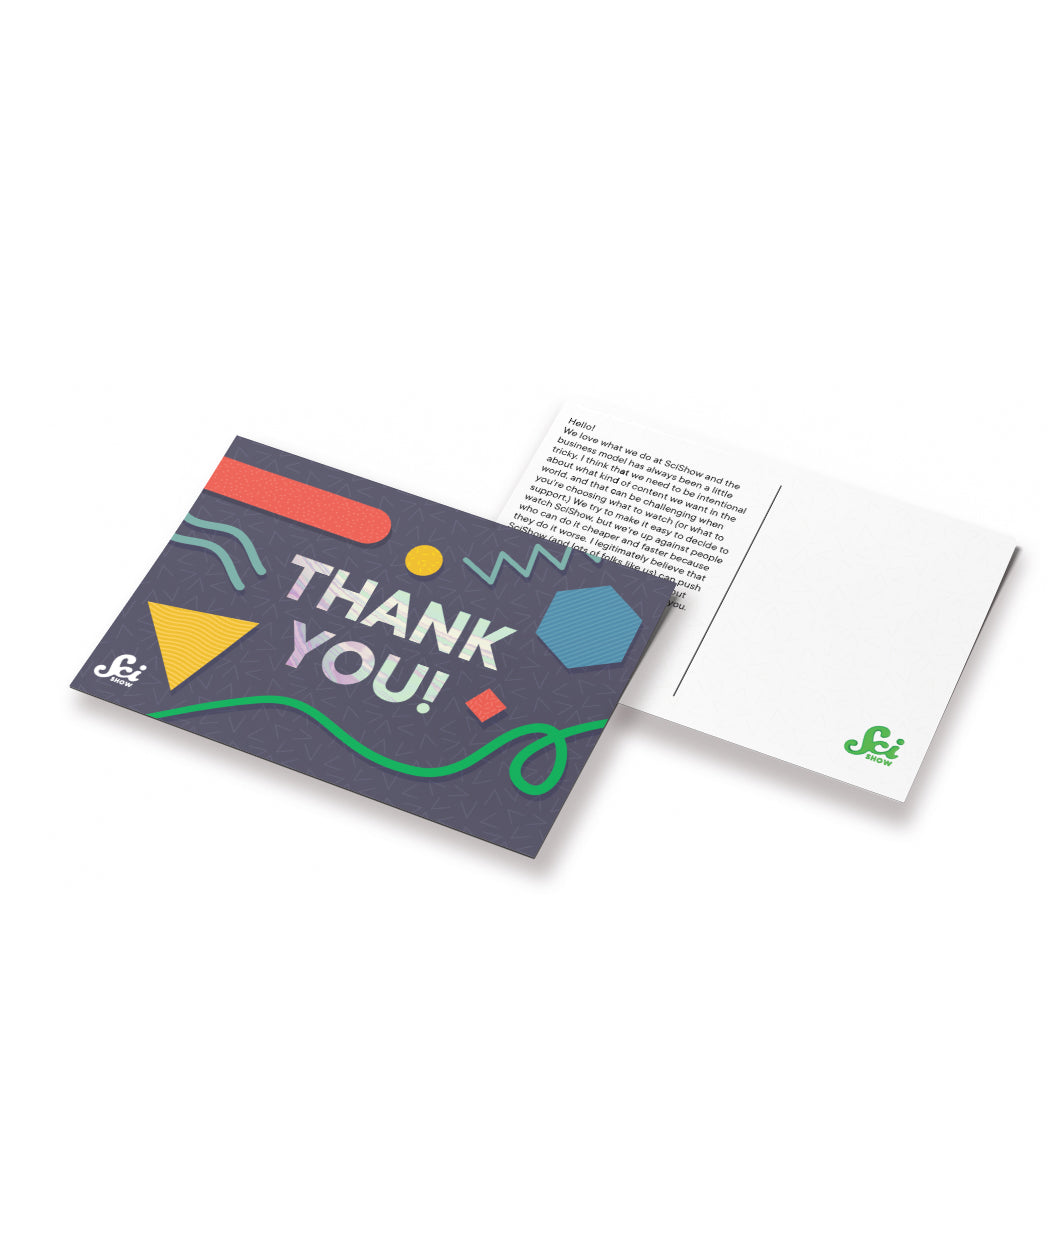 Frontside of a postcard that says "Thank You!" with colorful shapes around it and the backside of the postcard with a small message from the SciShow team. -from SciShow